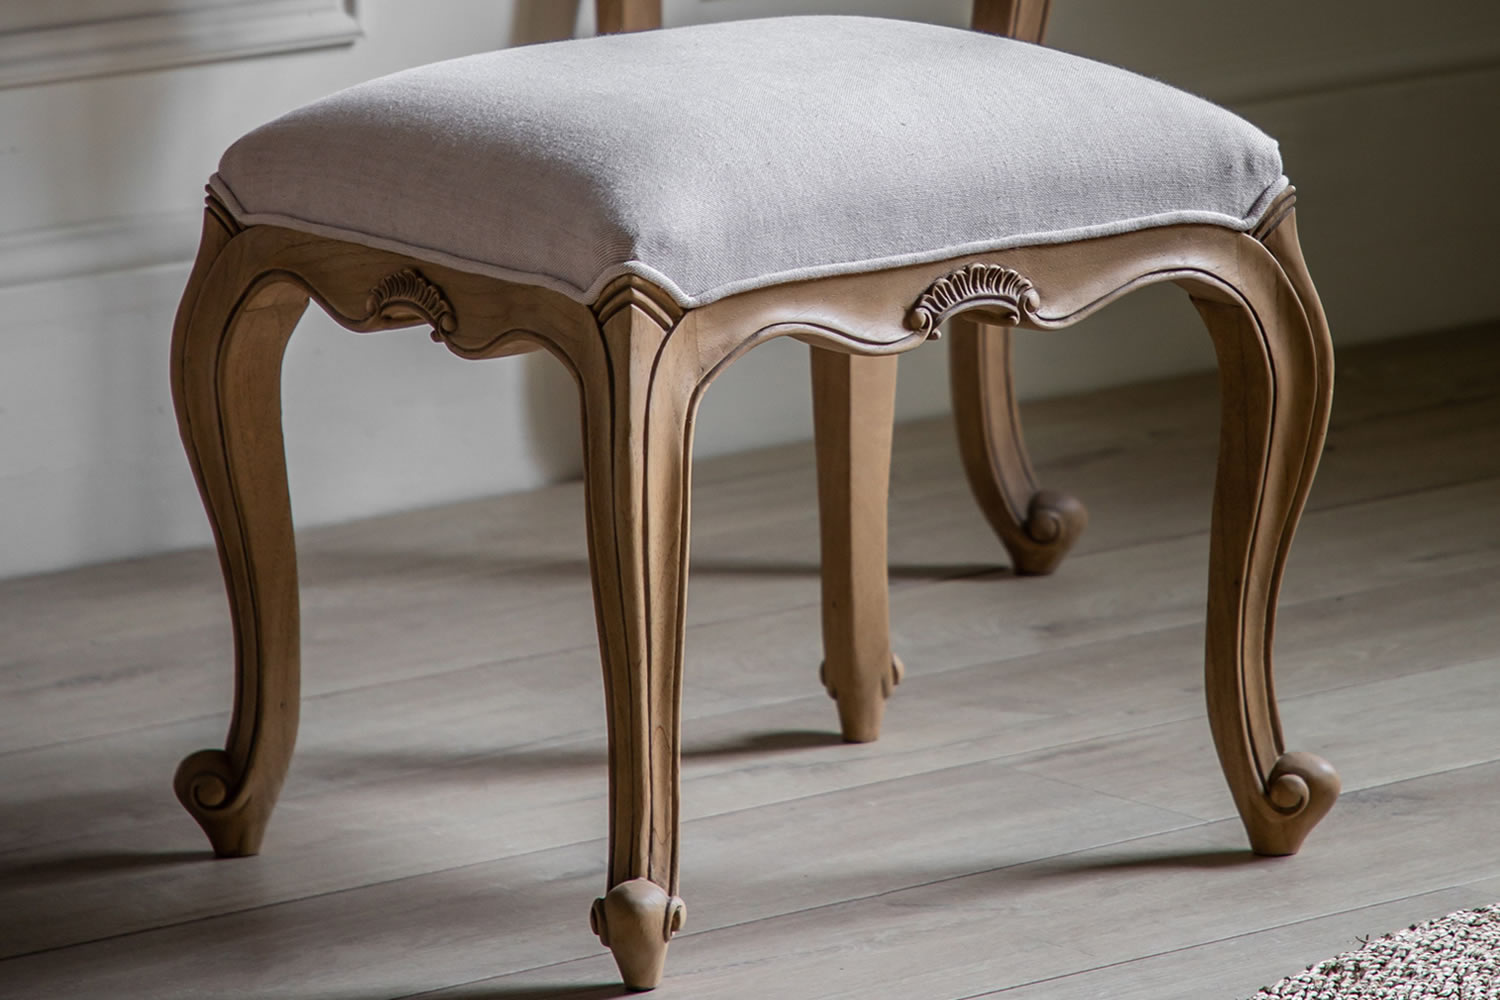 View Chic Bedroom Dressing Table Stool Crafted From Mindi Wood Elegant Weathered Finish Deeply Padded Seat Natural Linen Fabric French Inspired information